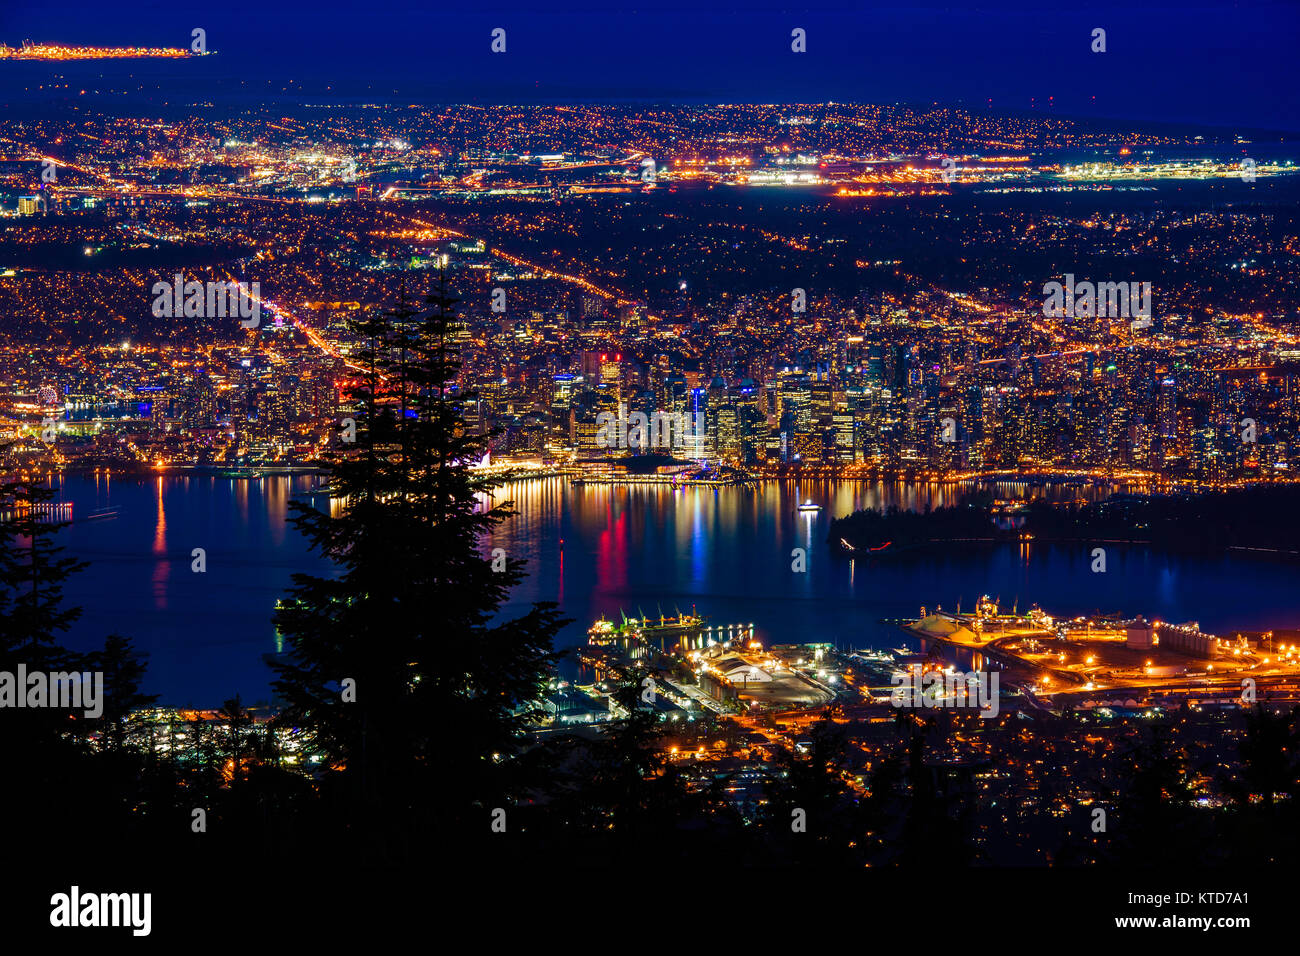 Aerial view of Vancouver city by night, British Columbia, Canada. Photographed from the top of the Grouse Mountain. Stock Photo